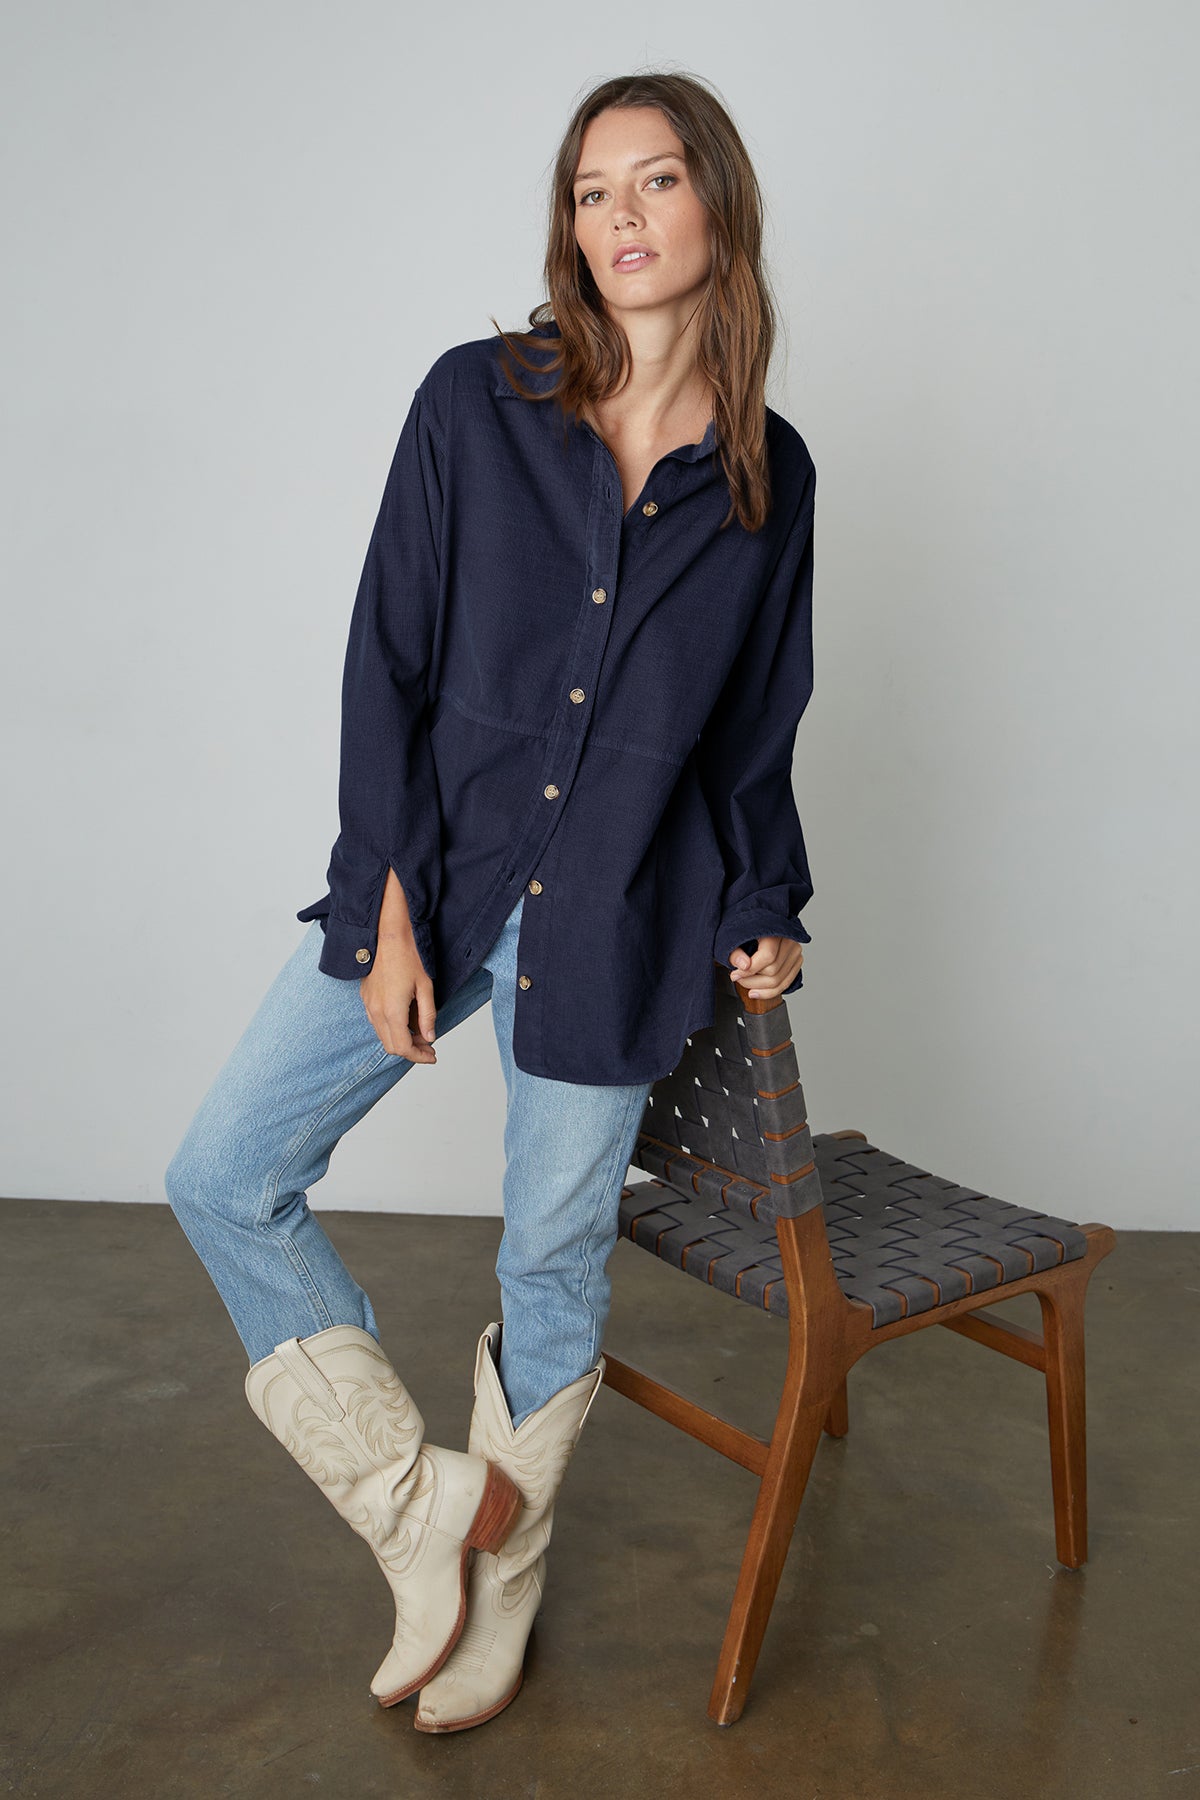 Model leaning on chair wearing Jeslyn Corduroy Button-Up Shirt in midnight blue with light blue jeans and cream colored cowboy boots.-25052438233281